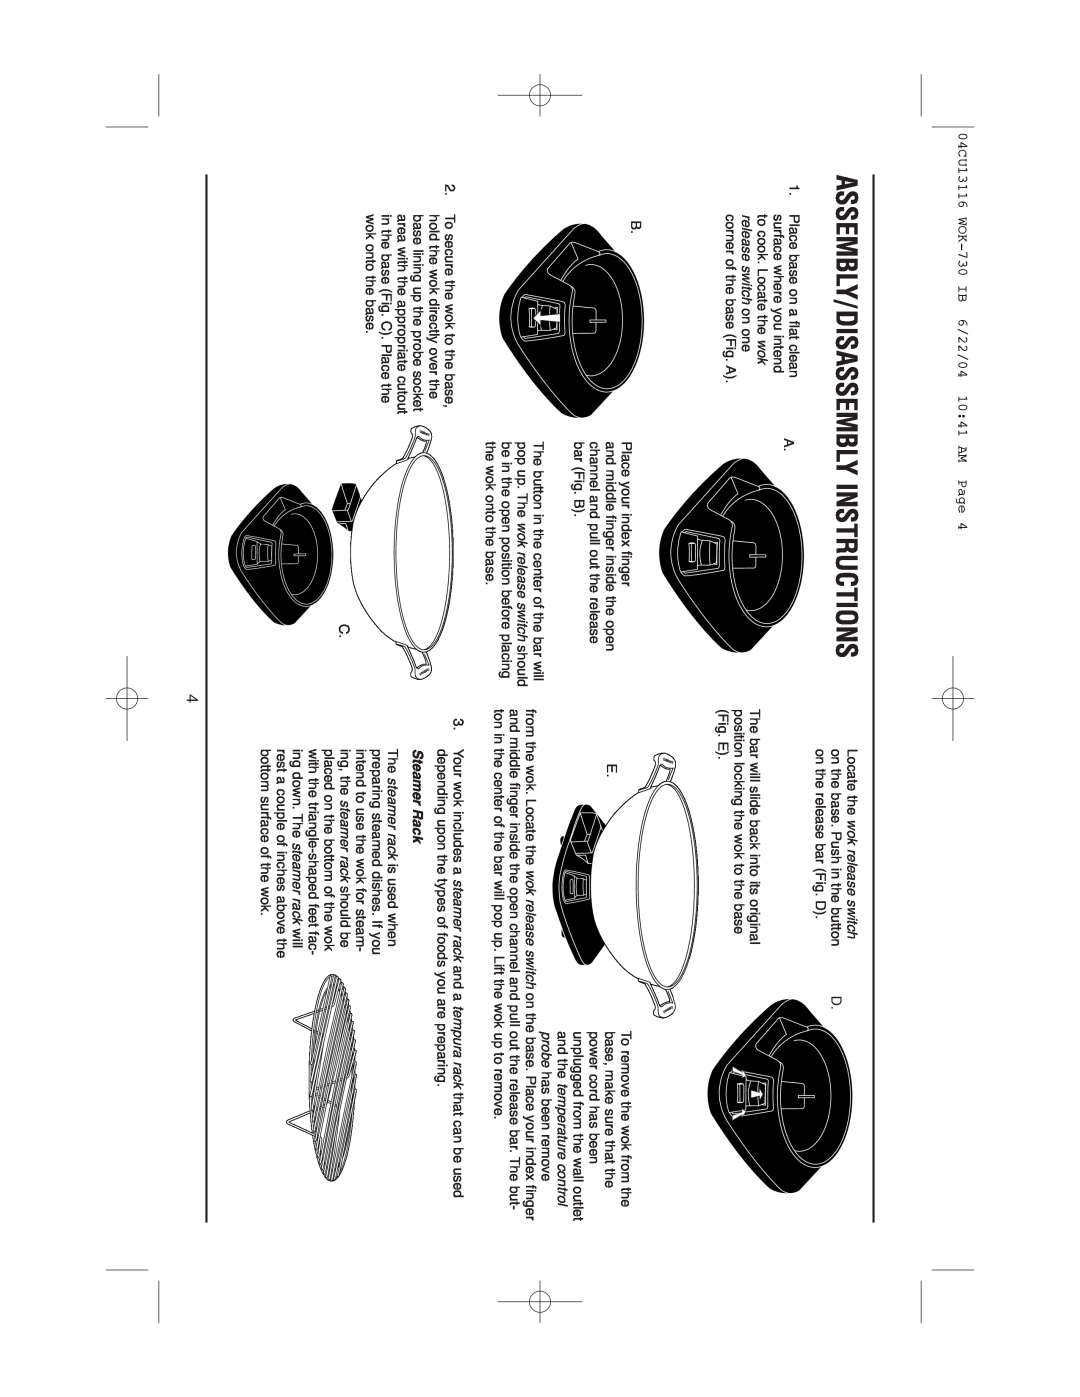 Cuisinart WOK-730 manual Assembly/Disassembly Instructions, Locate the wok release switch, and the temperature control 